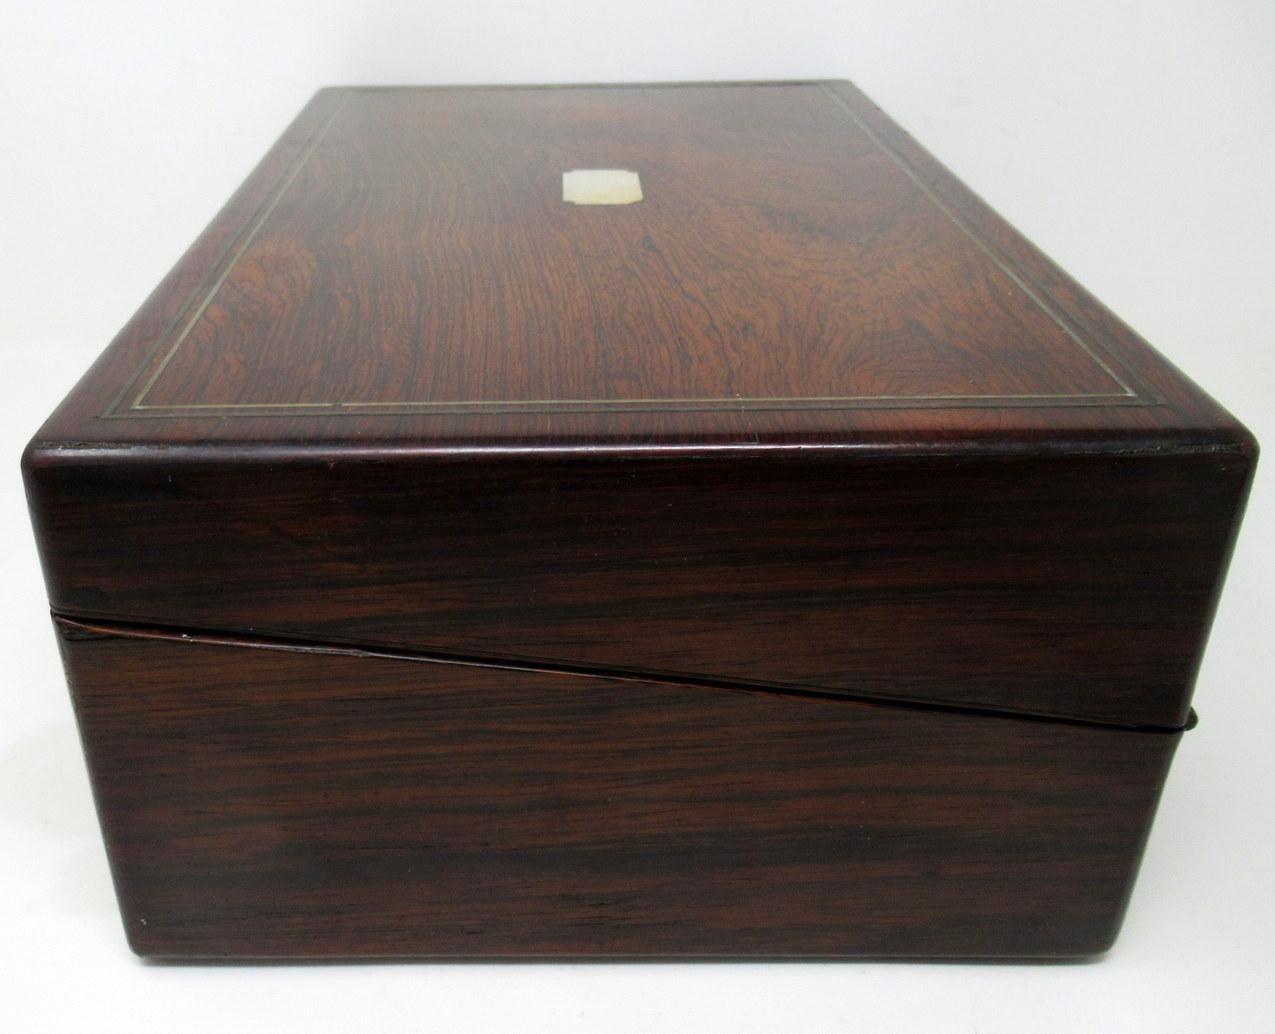 19th Century Antique Victorian Brass Inlaid Mahogany Traveling Desk Wooden Writing Slope Box 